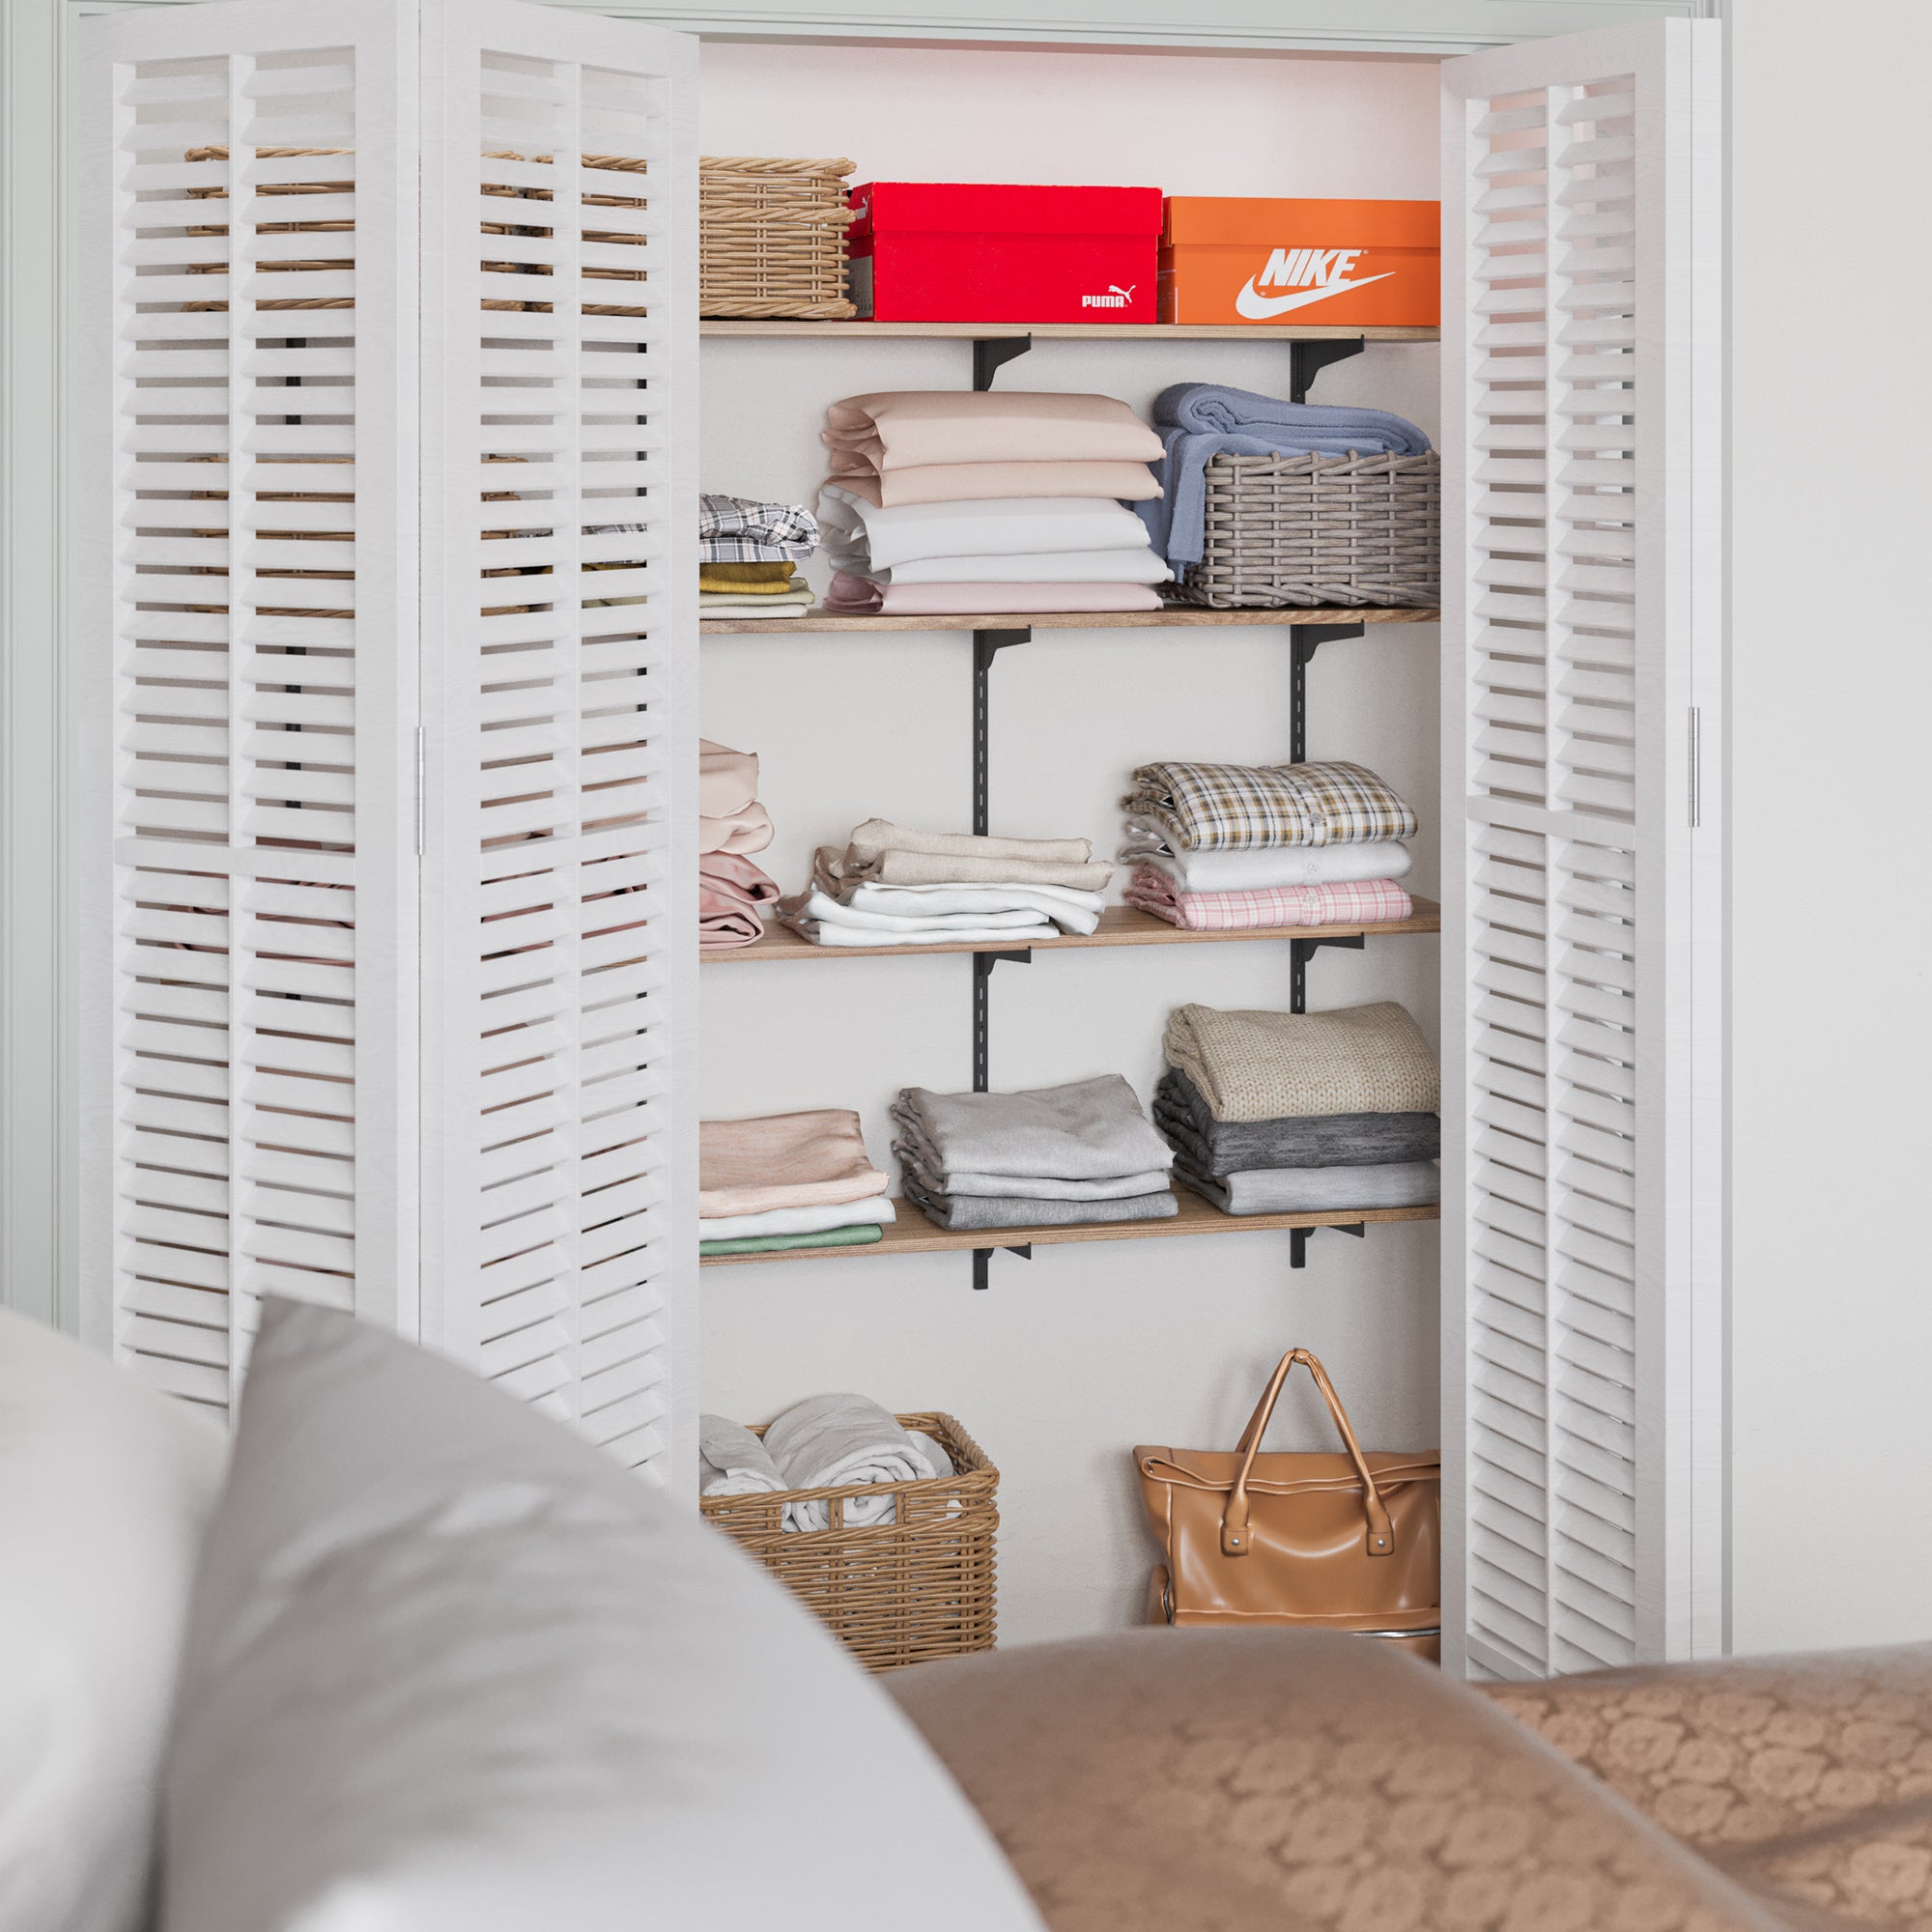 An open closet organized with bedroom shelf full of neatly folded clothes, boxes, and storage baskets, providing a practical and efficient use of space.